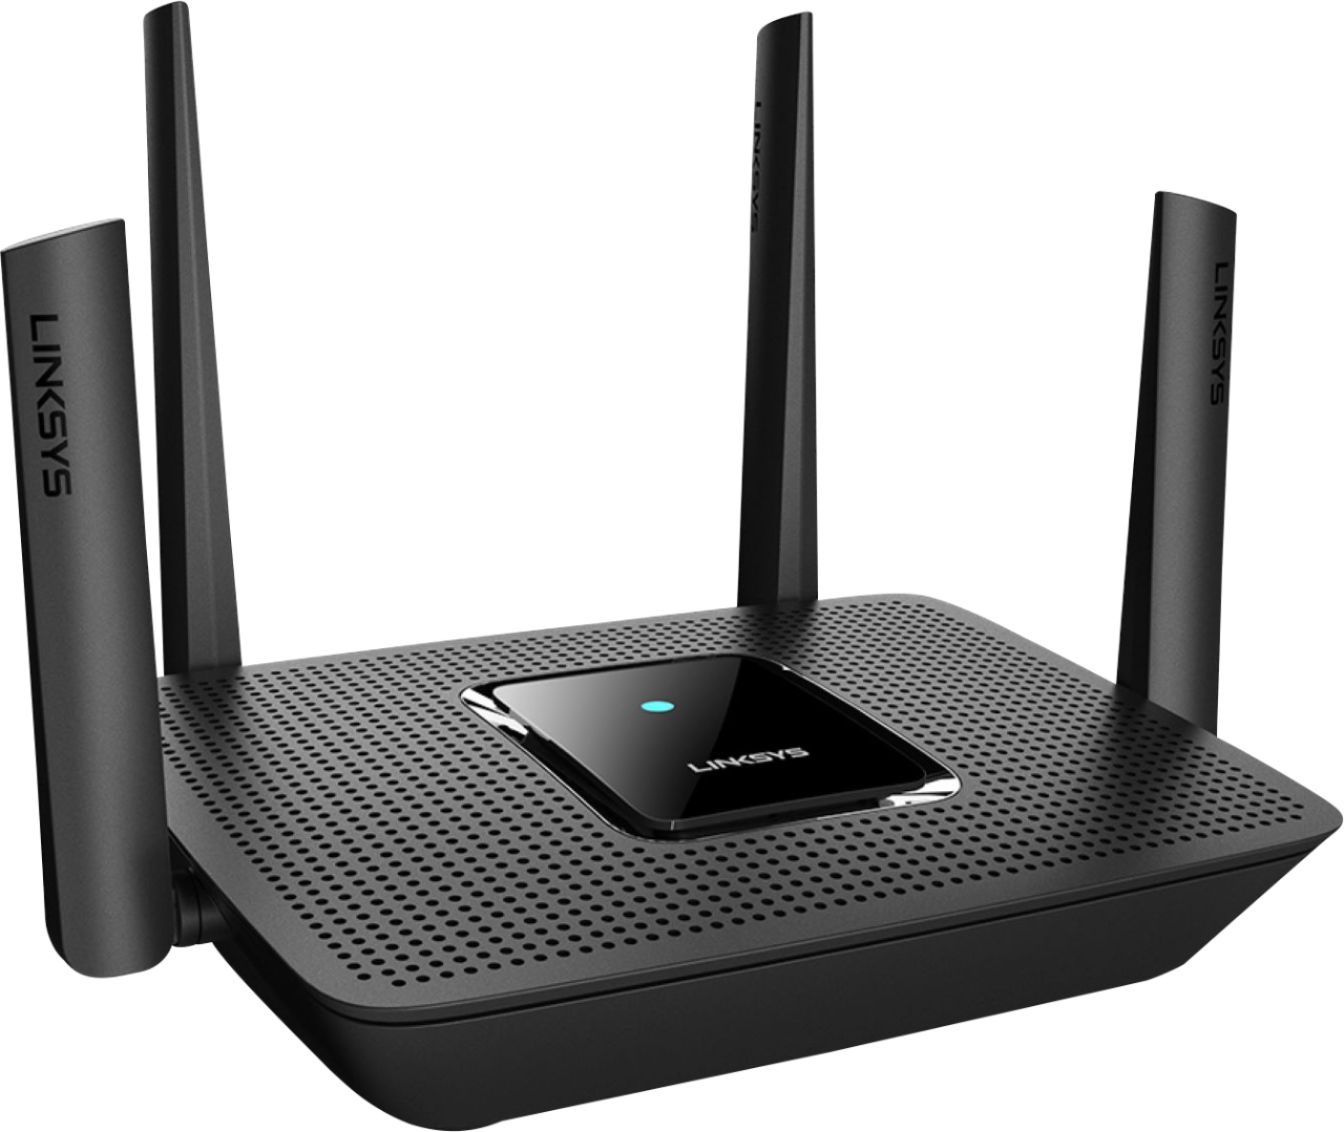 Angle View: Linksys - Max-Stream AC3000 Tri-Band Mesh Wi-Fi 5 Router - Black